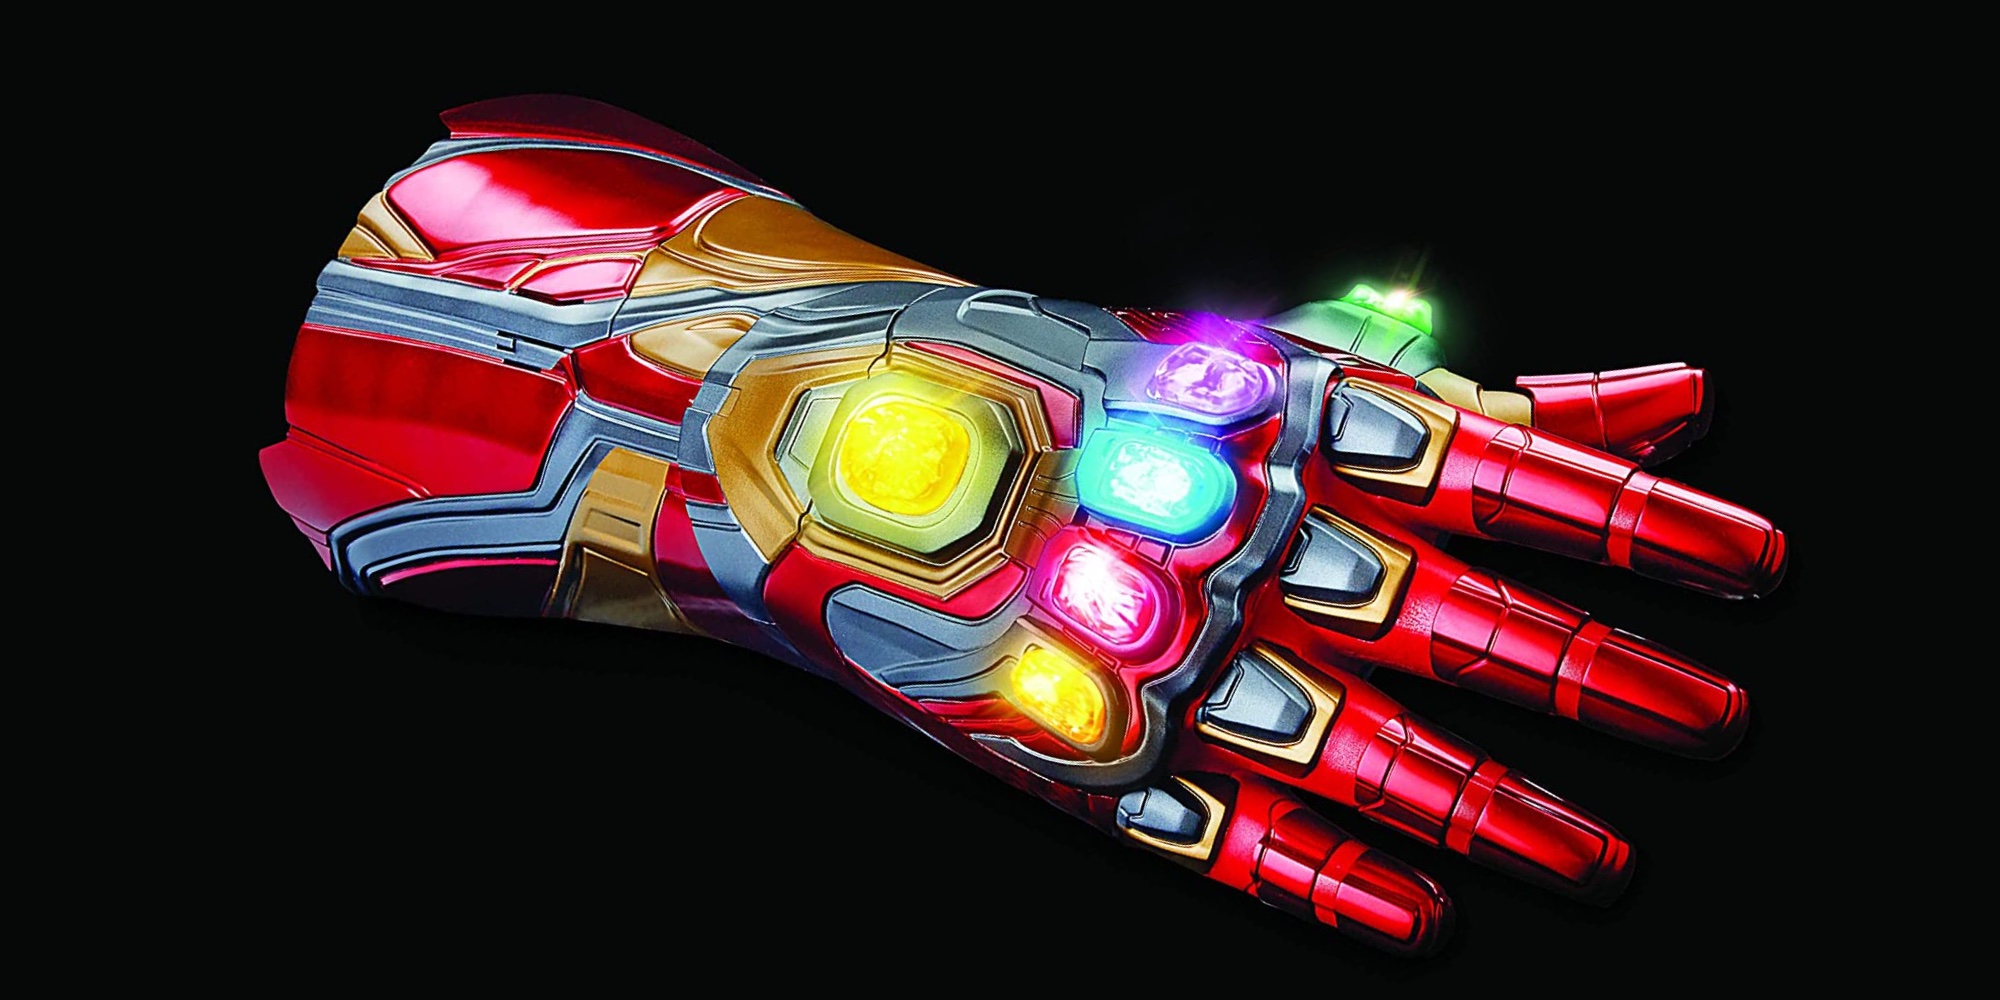 Iron Man Nano Gauntlet debuts as latest Marvel Legends prop - 9to5Toys